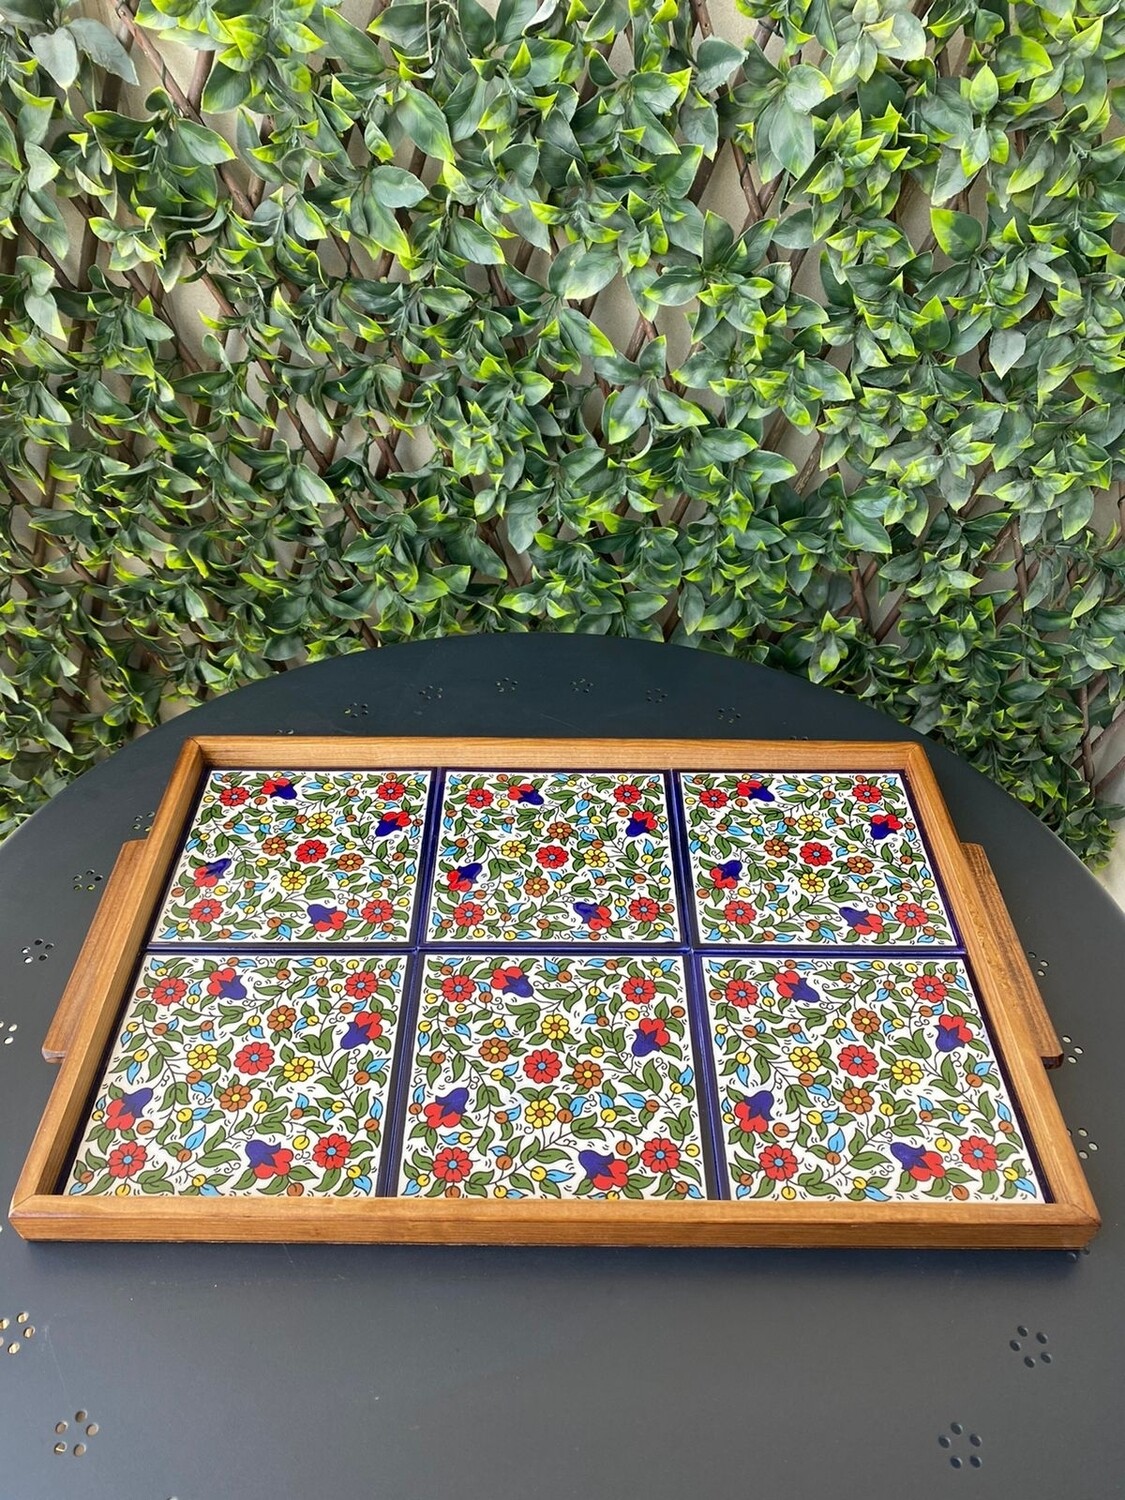 X-large wooden tray